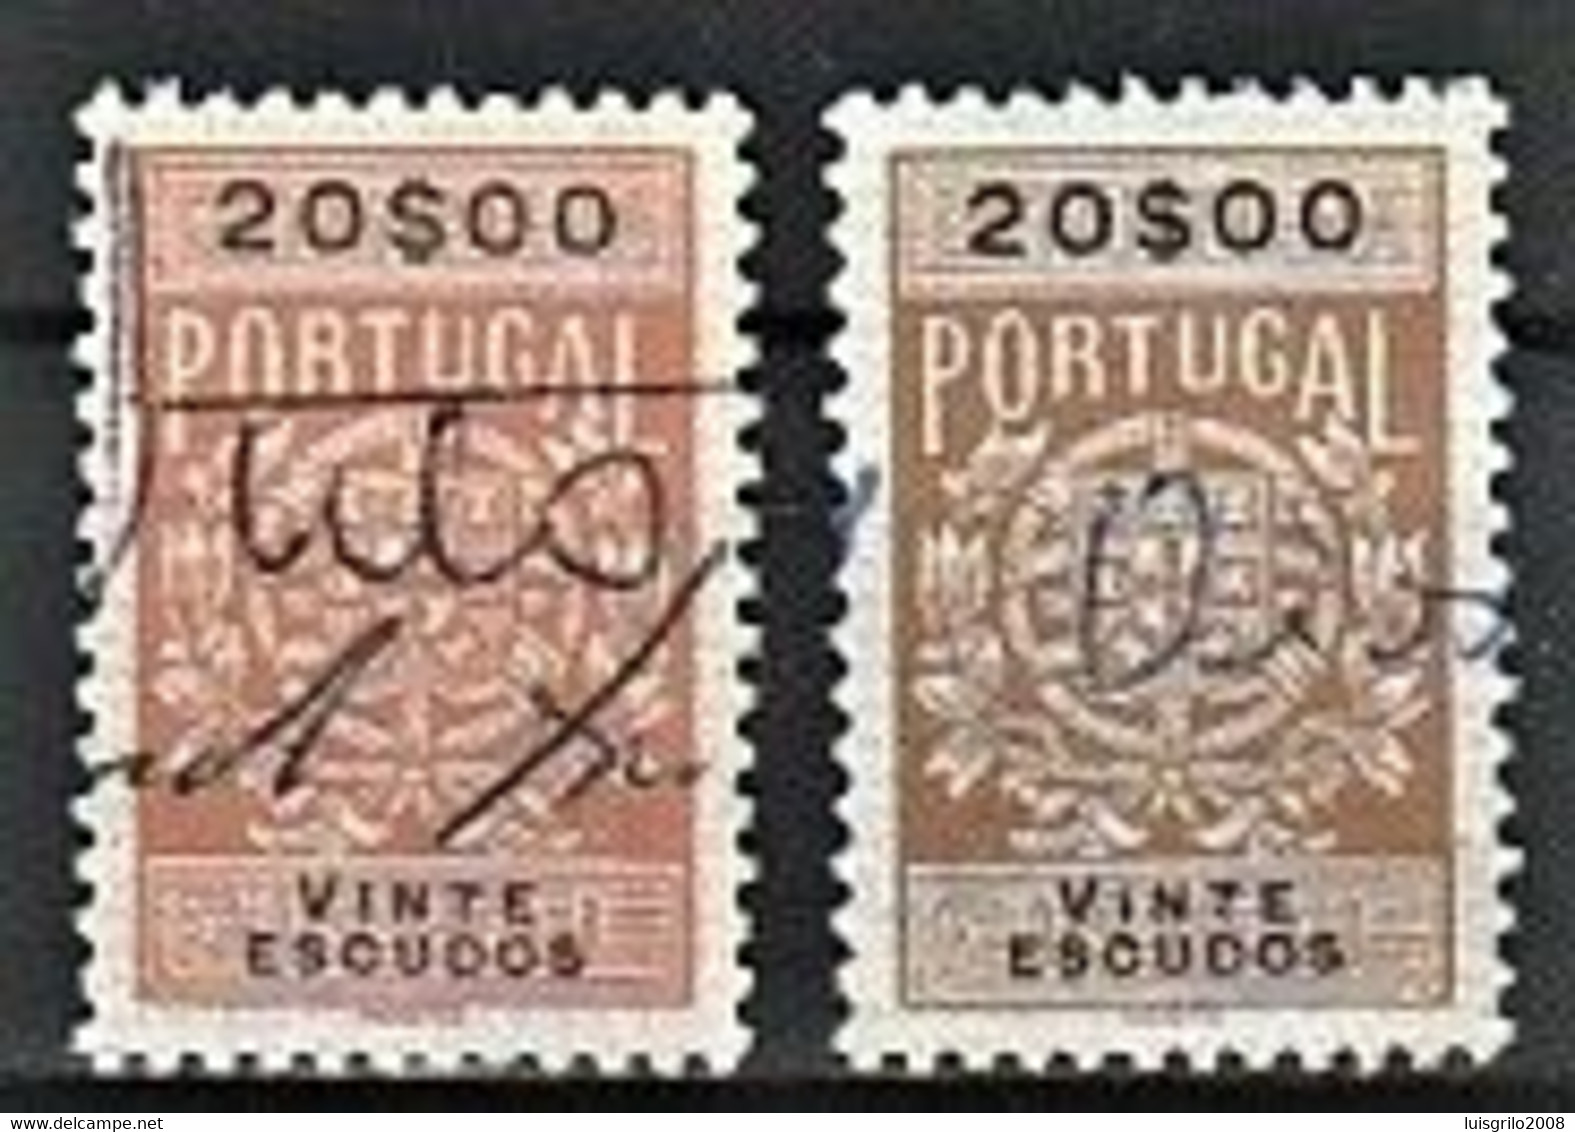 Fiscal/ Revenue, Portugal 1940 - Estampilha Fiscal -|- 20$00 - COLOR VARIANT - Is The Stamp Of The Right - Gebruikt